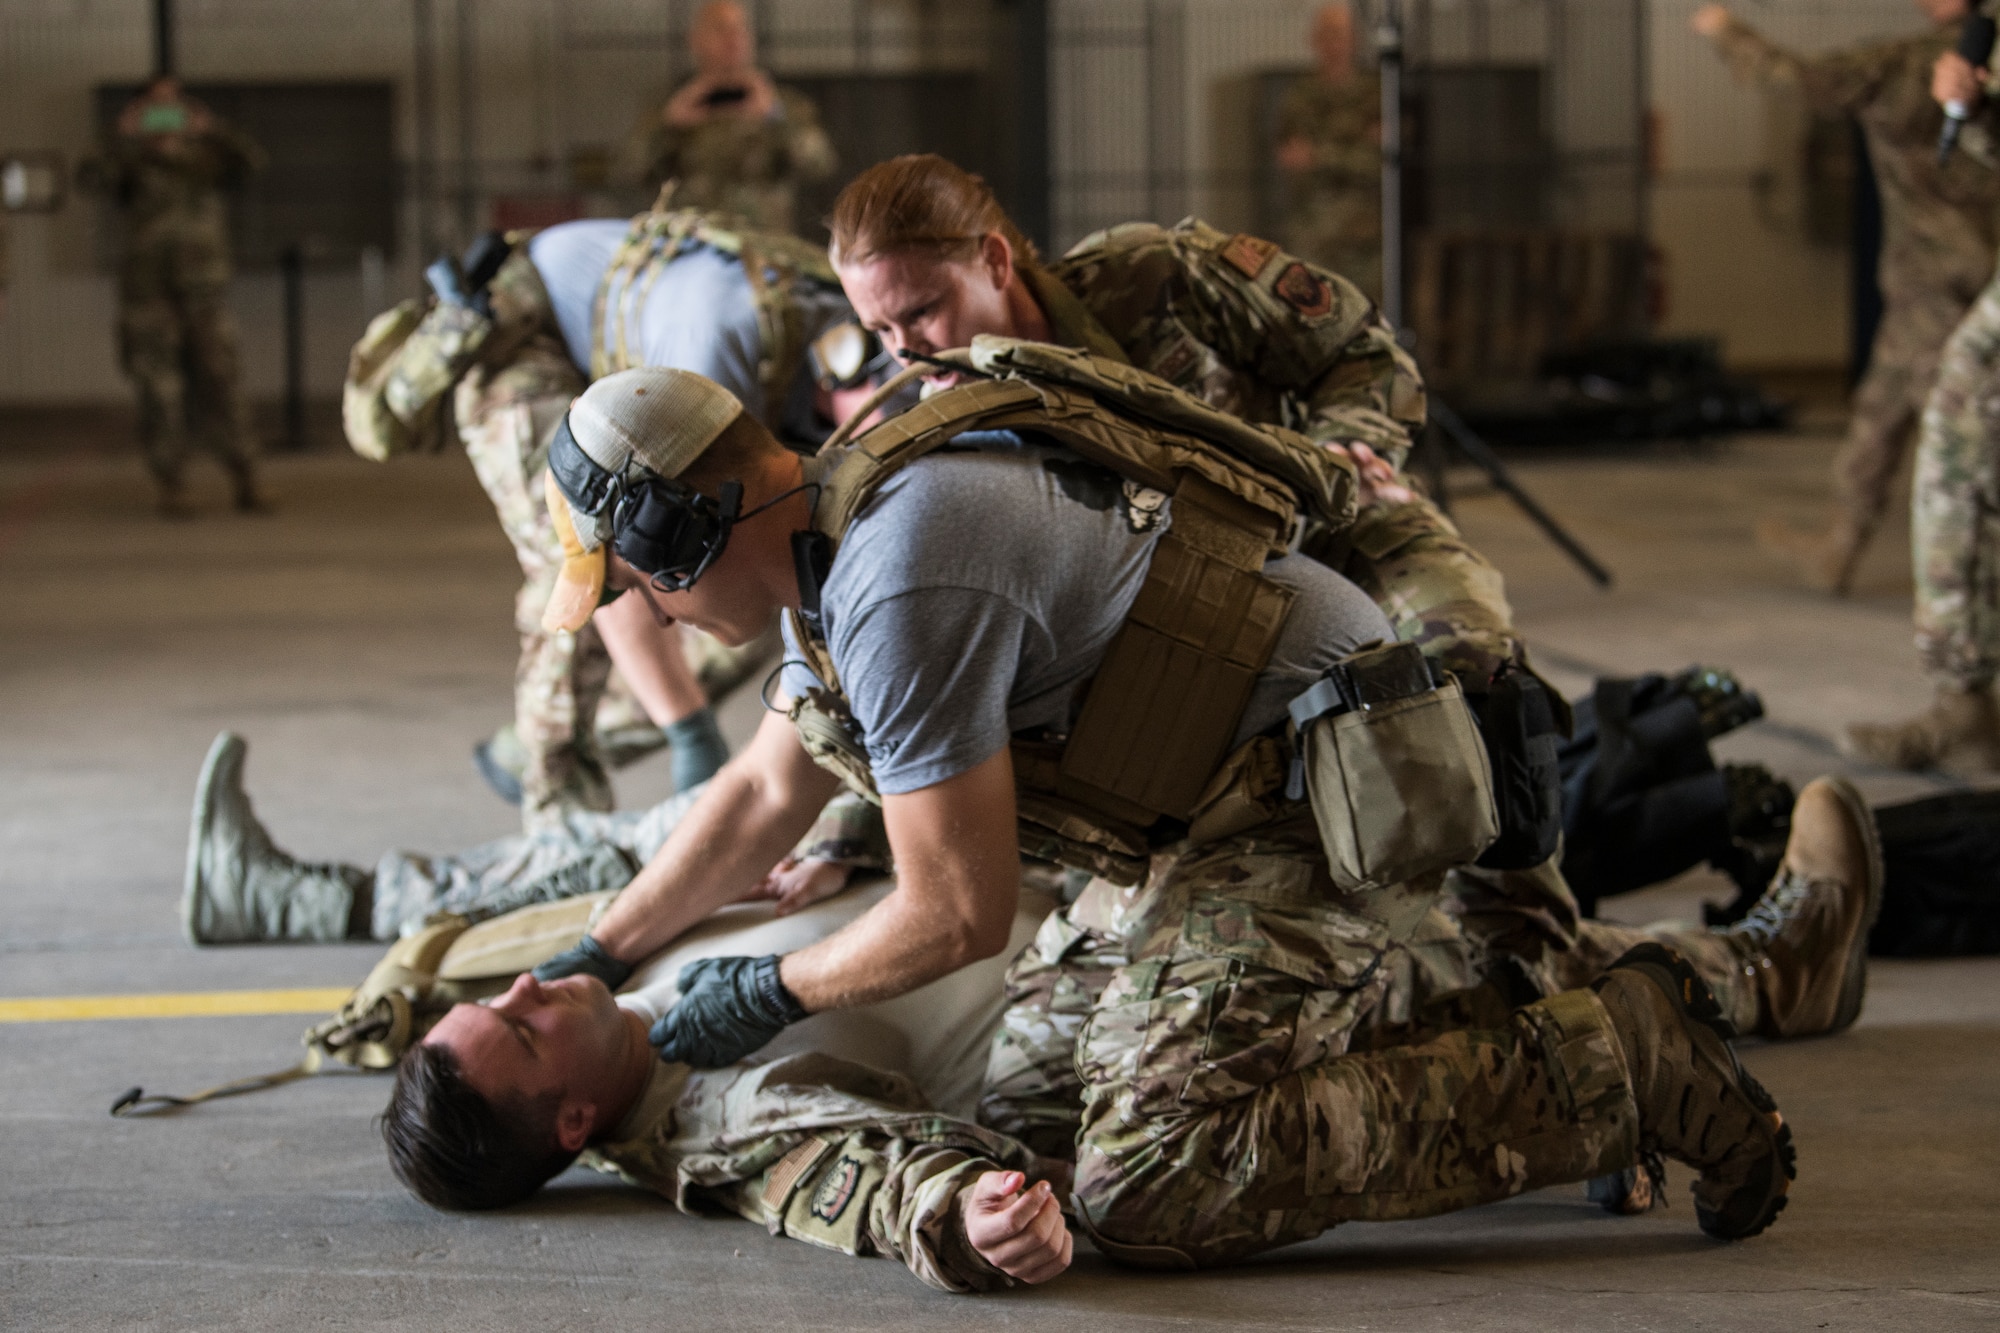 An Airman pretends to check for a pulse on another Airman simulating injuries